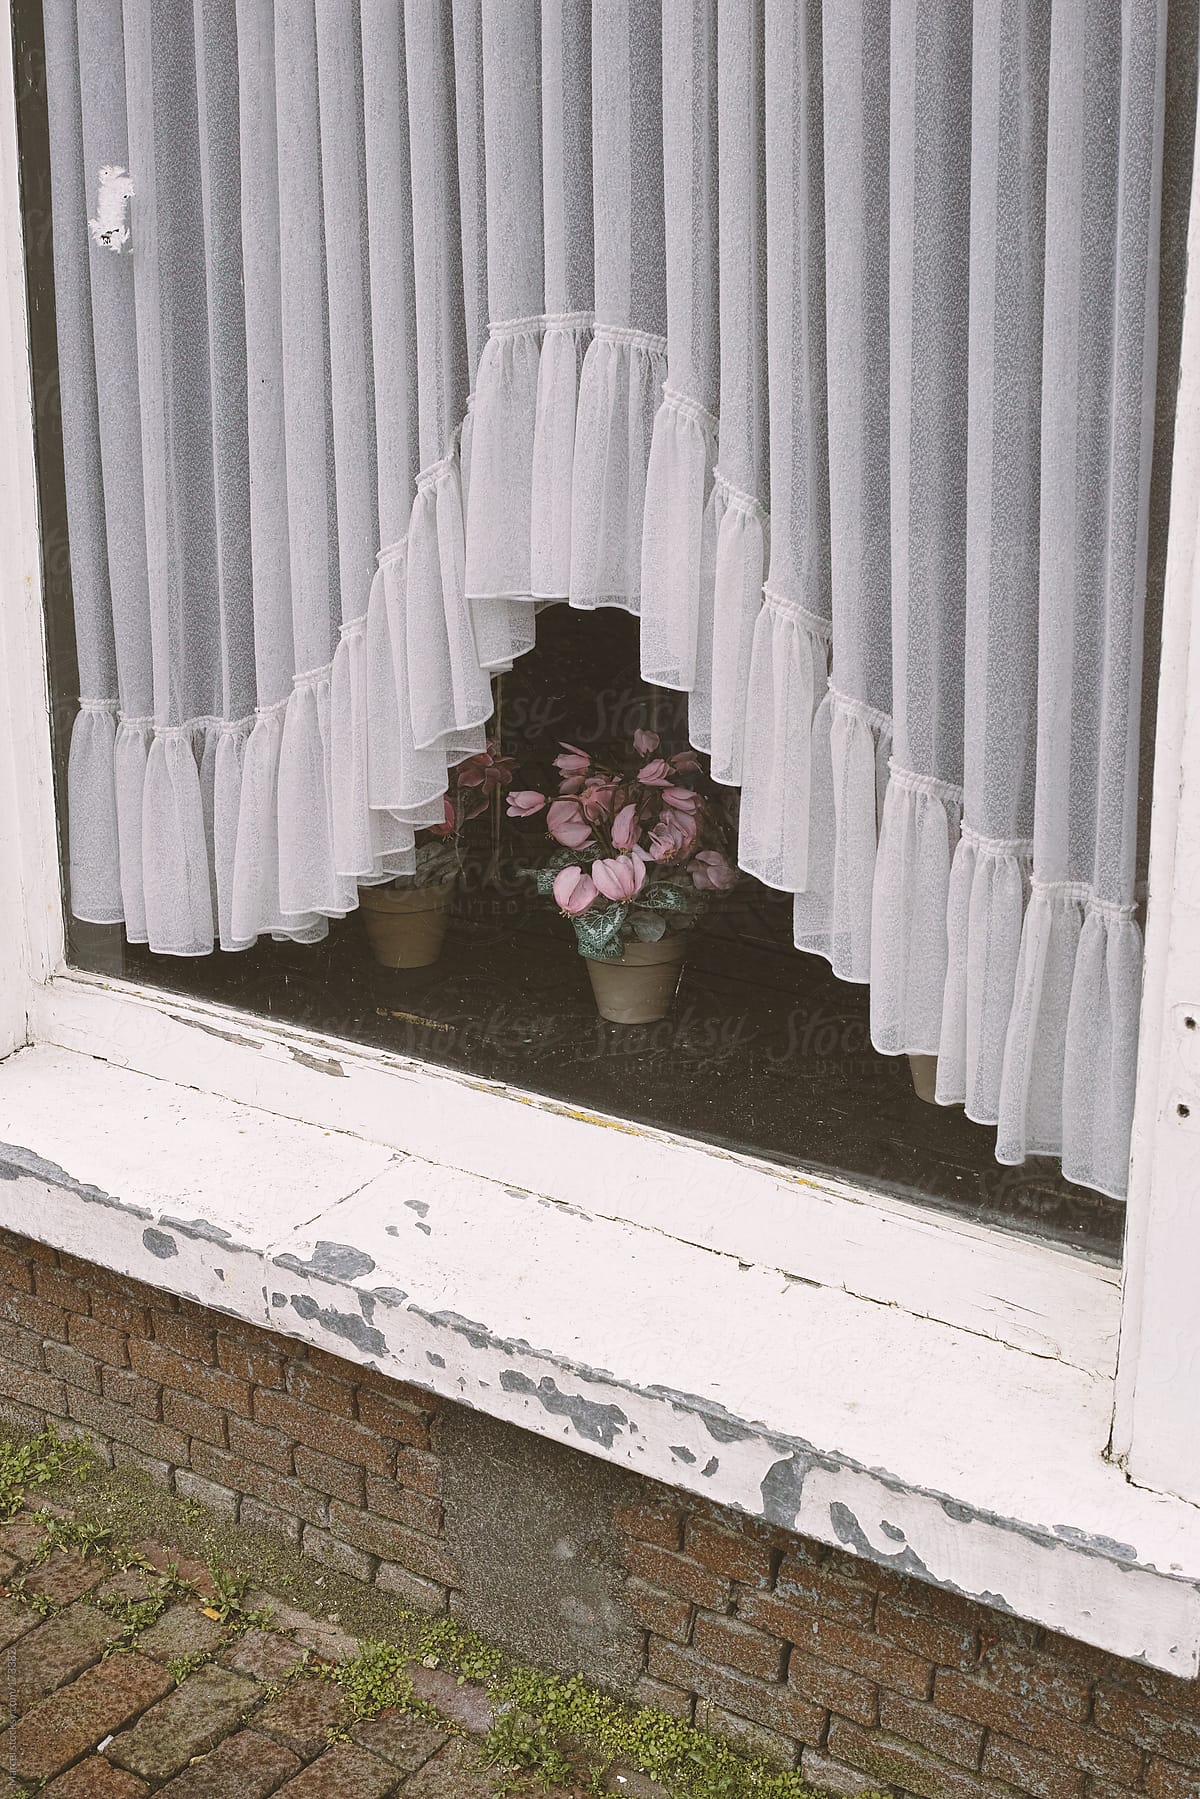 Fake cyclamen plant in the window of an old house